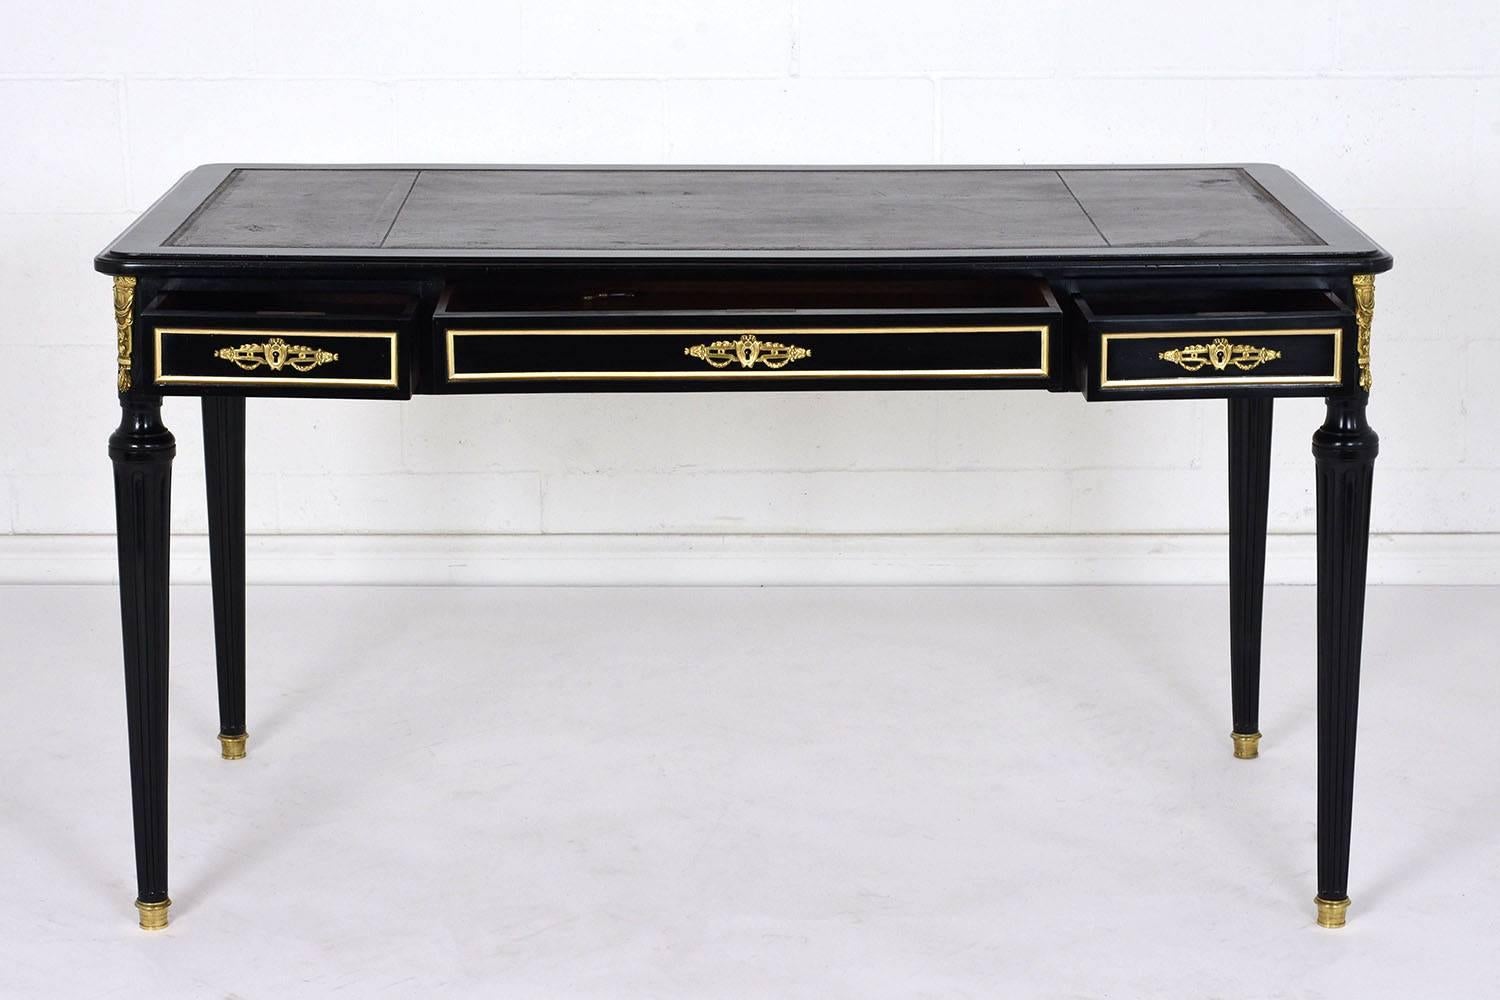 This 1900s French Louis XVI-style desk is made of mahogany wood that has been ebonized in a rich black color with a lacquered finish. The top of the desk features an embossed leather insert in a rich brown color. The front of the desk has three